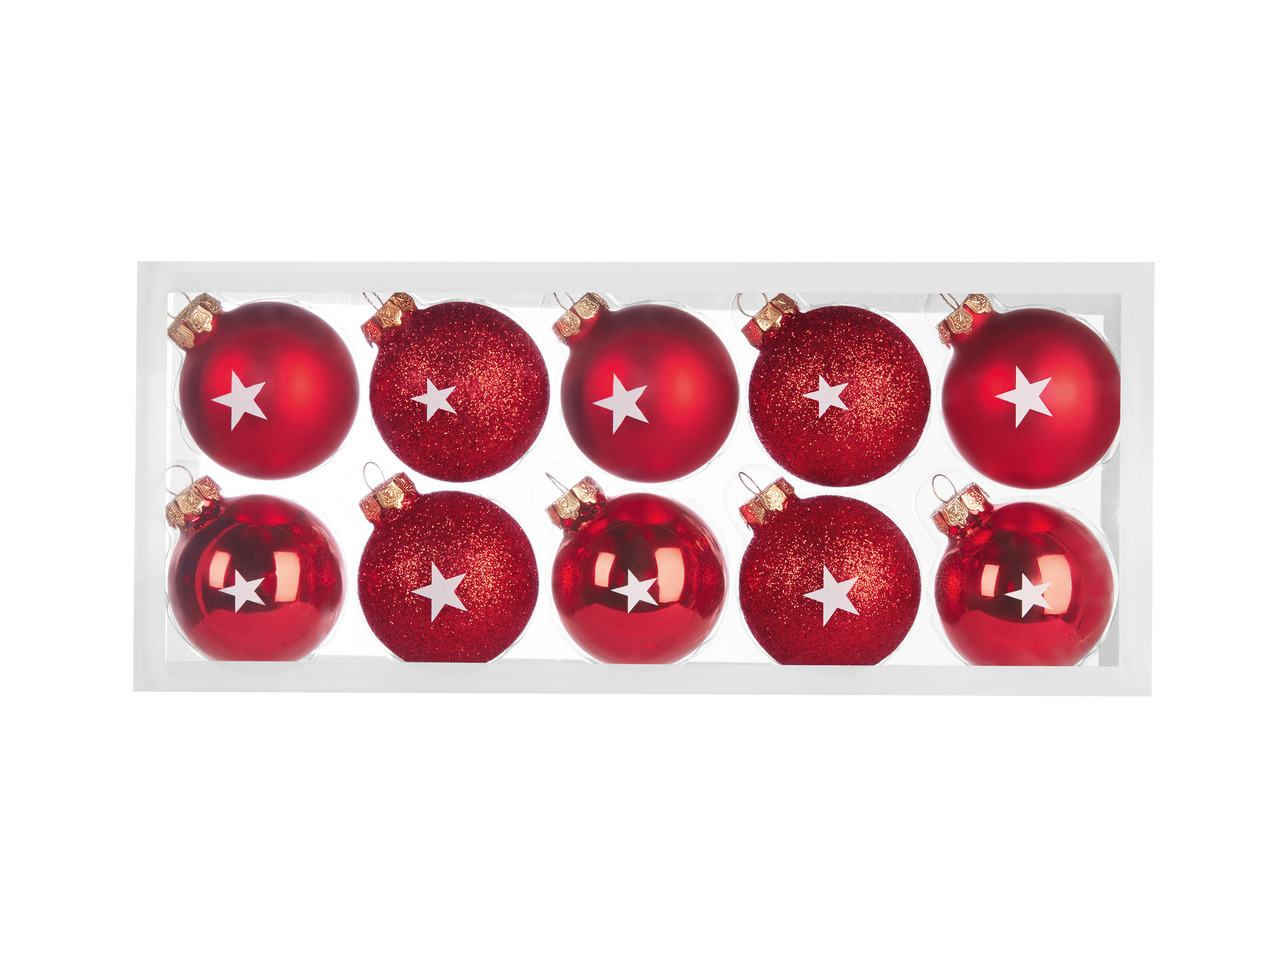 Melinera Glass Christmas Tree Baubles1